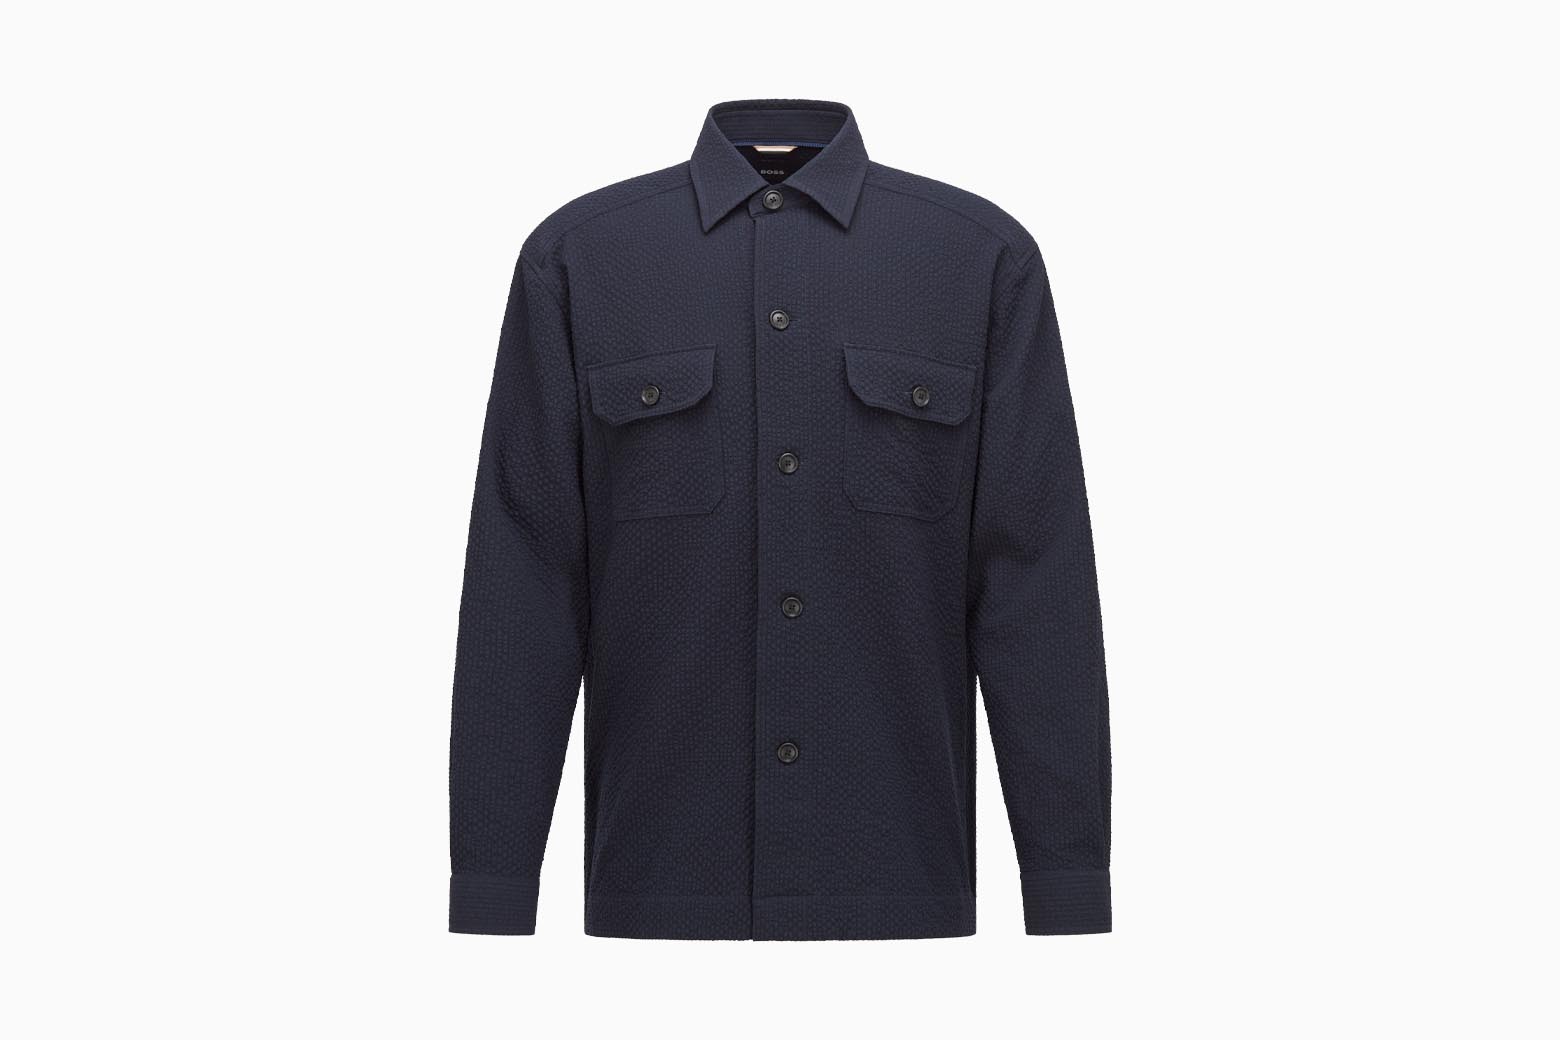 17 Best Overshirts For Men To Level Up Your Layering Game